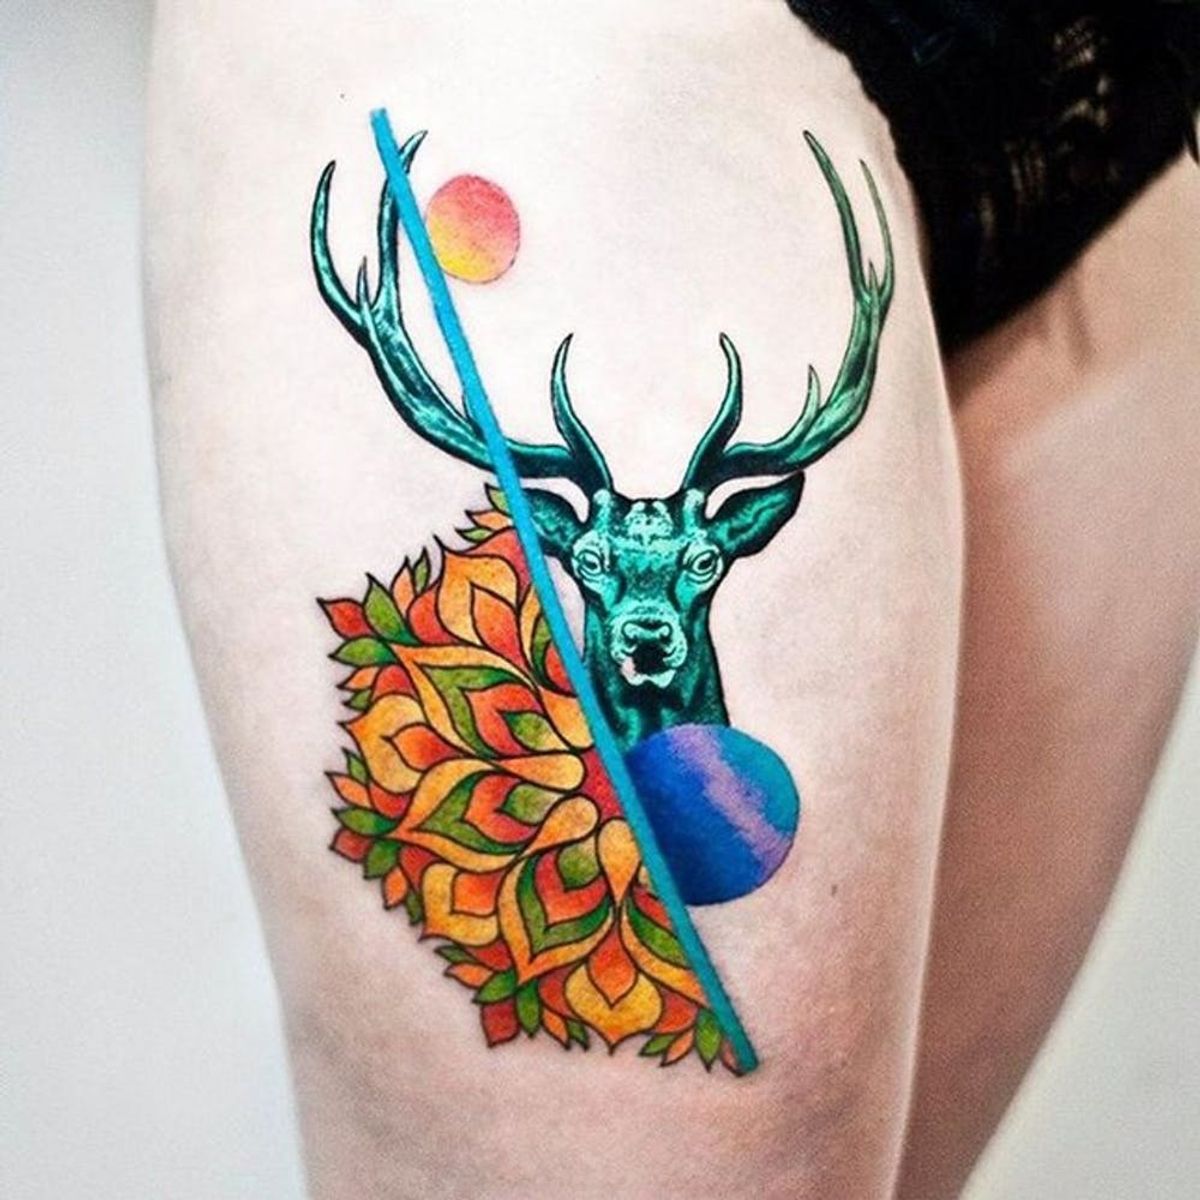 Lisa Frank Enthusiasts Will LOVE This Tattoo Artist’s Surreal Work